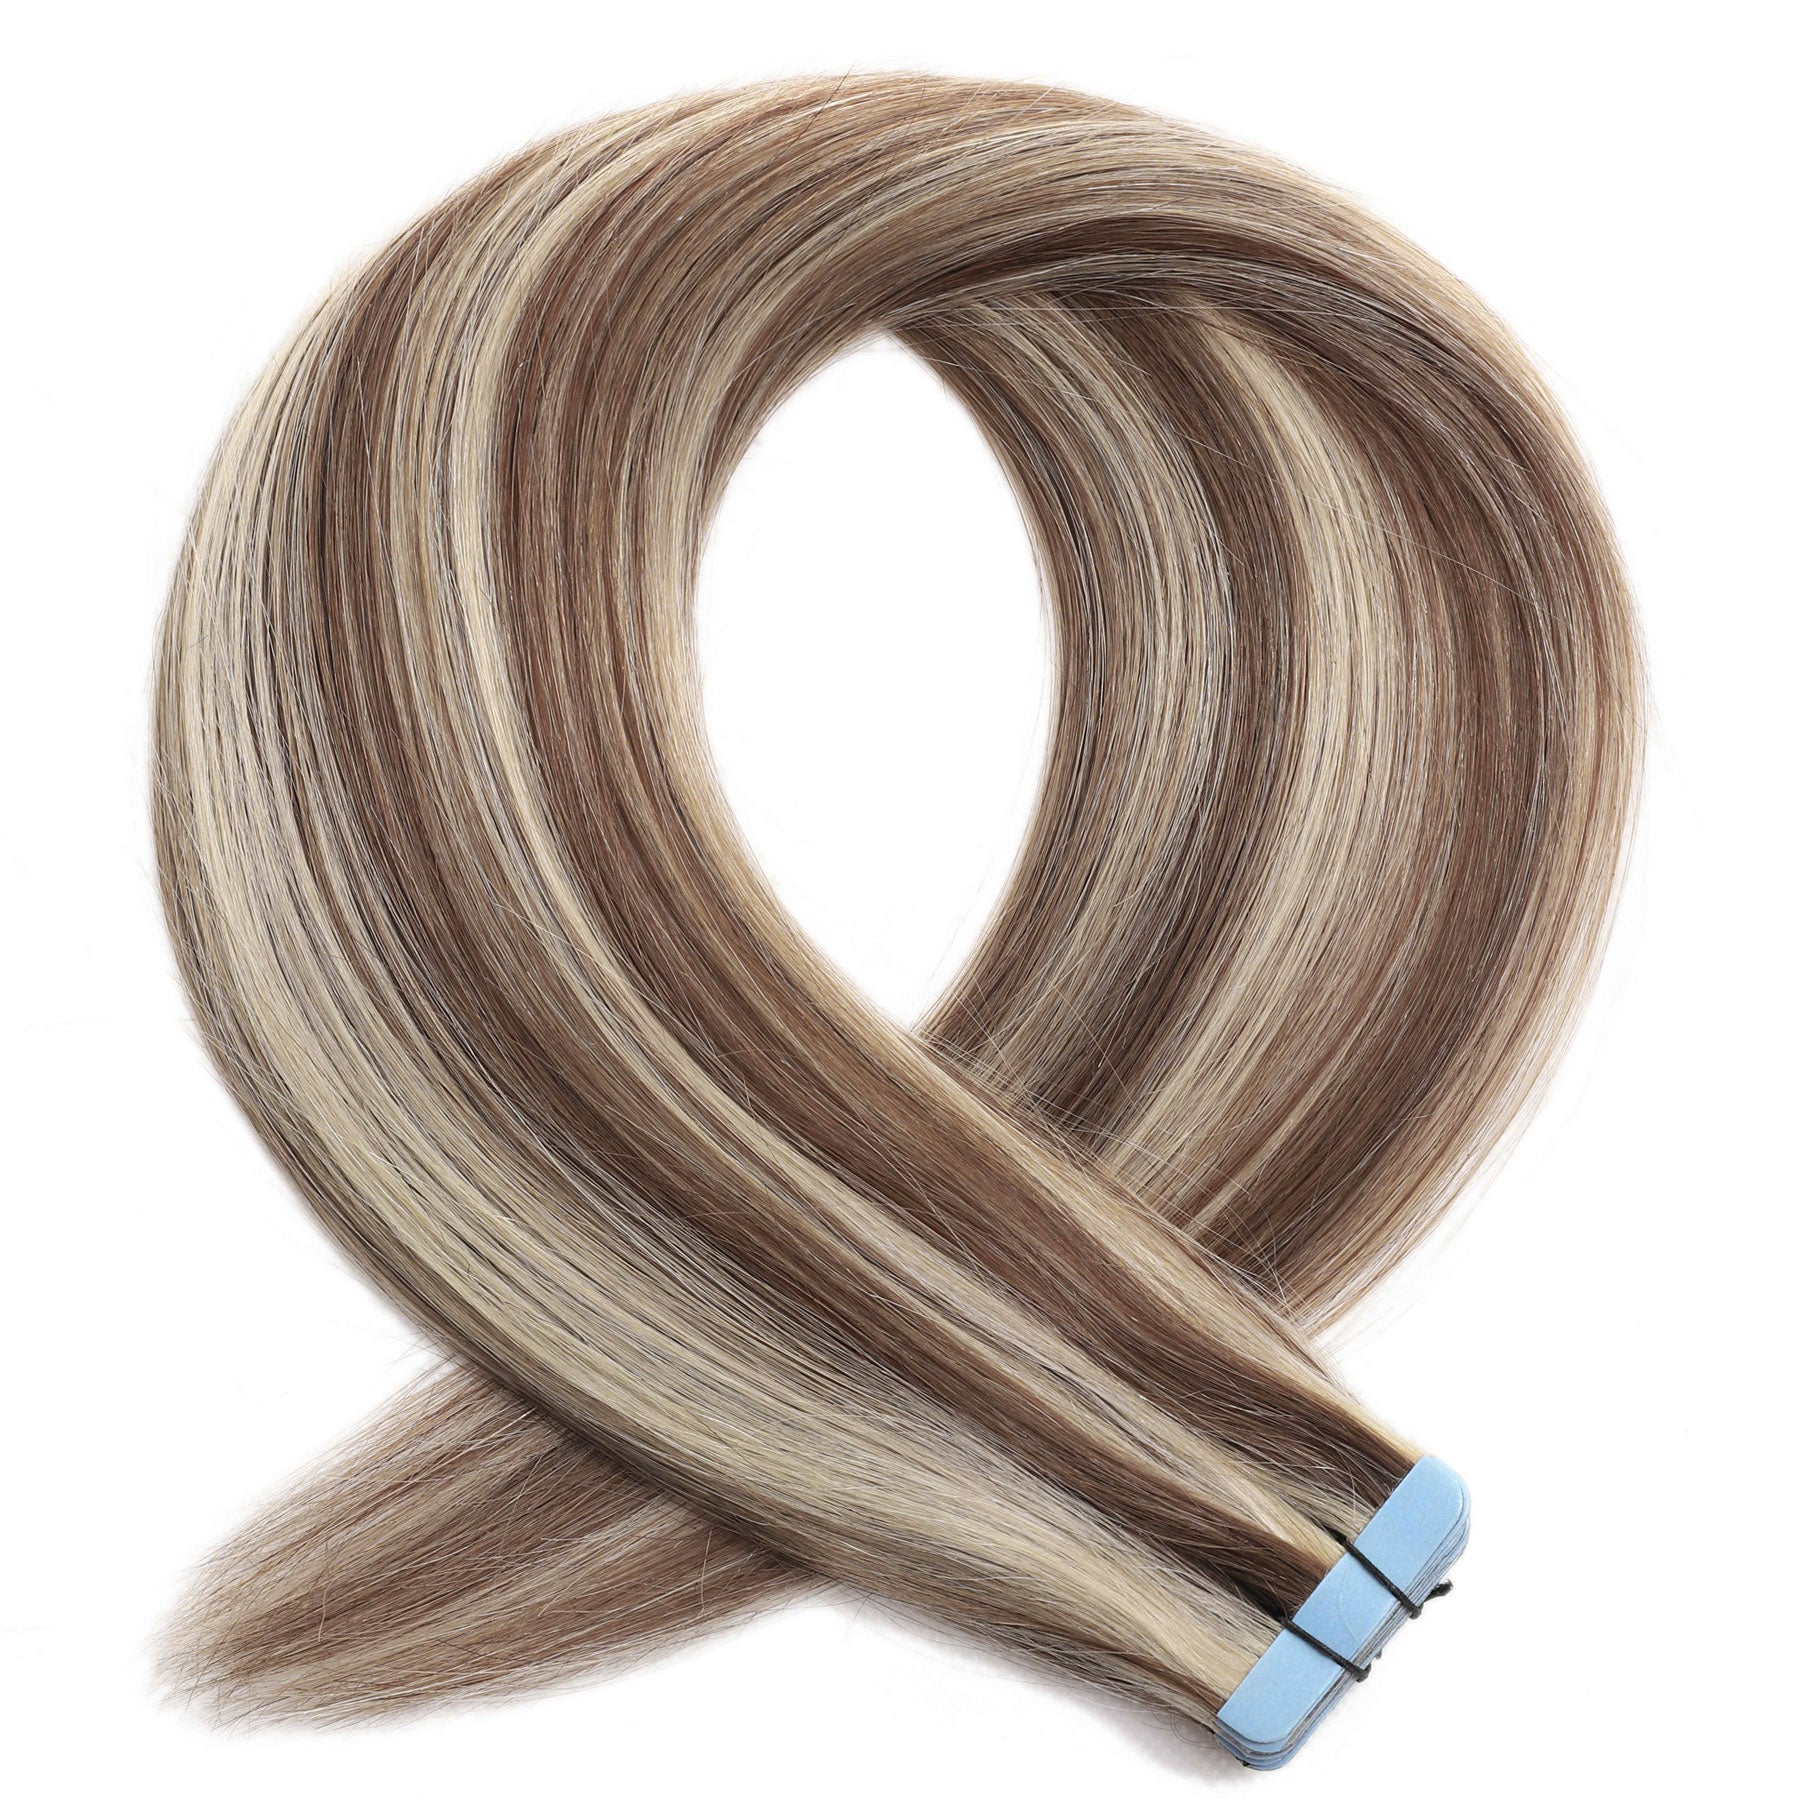 Seamless Blend Tape Hair Extensions